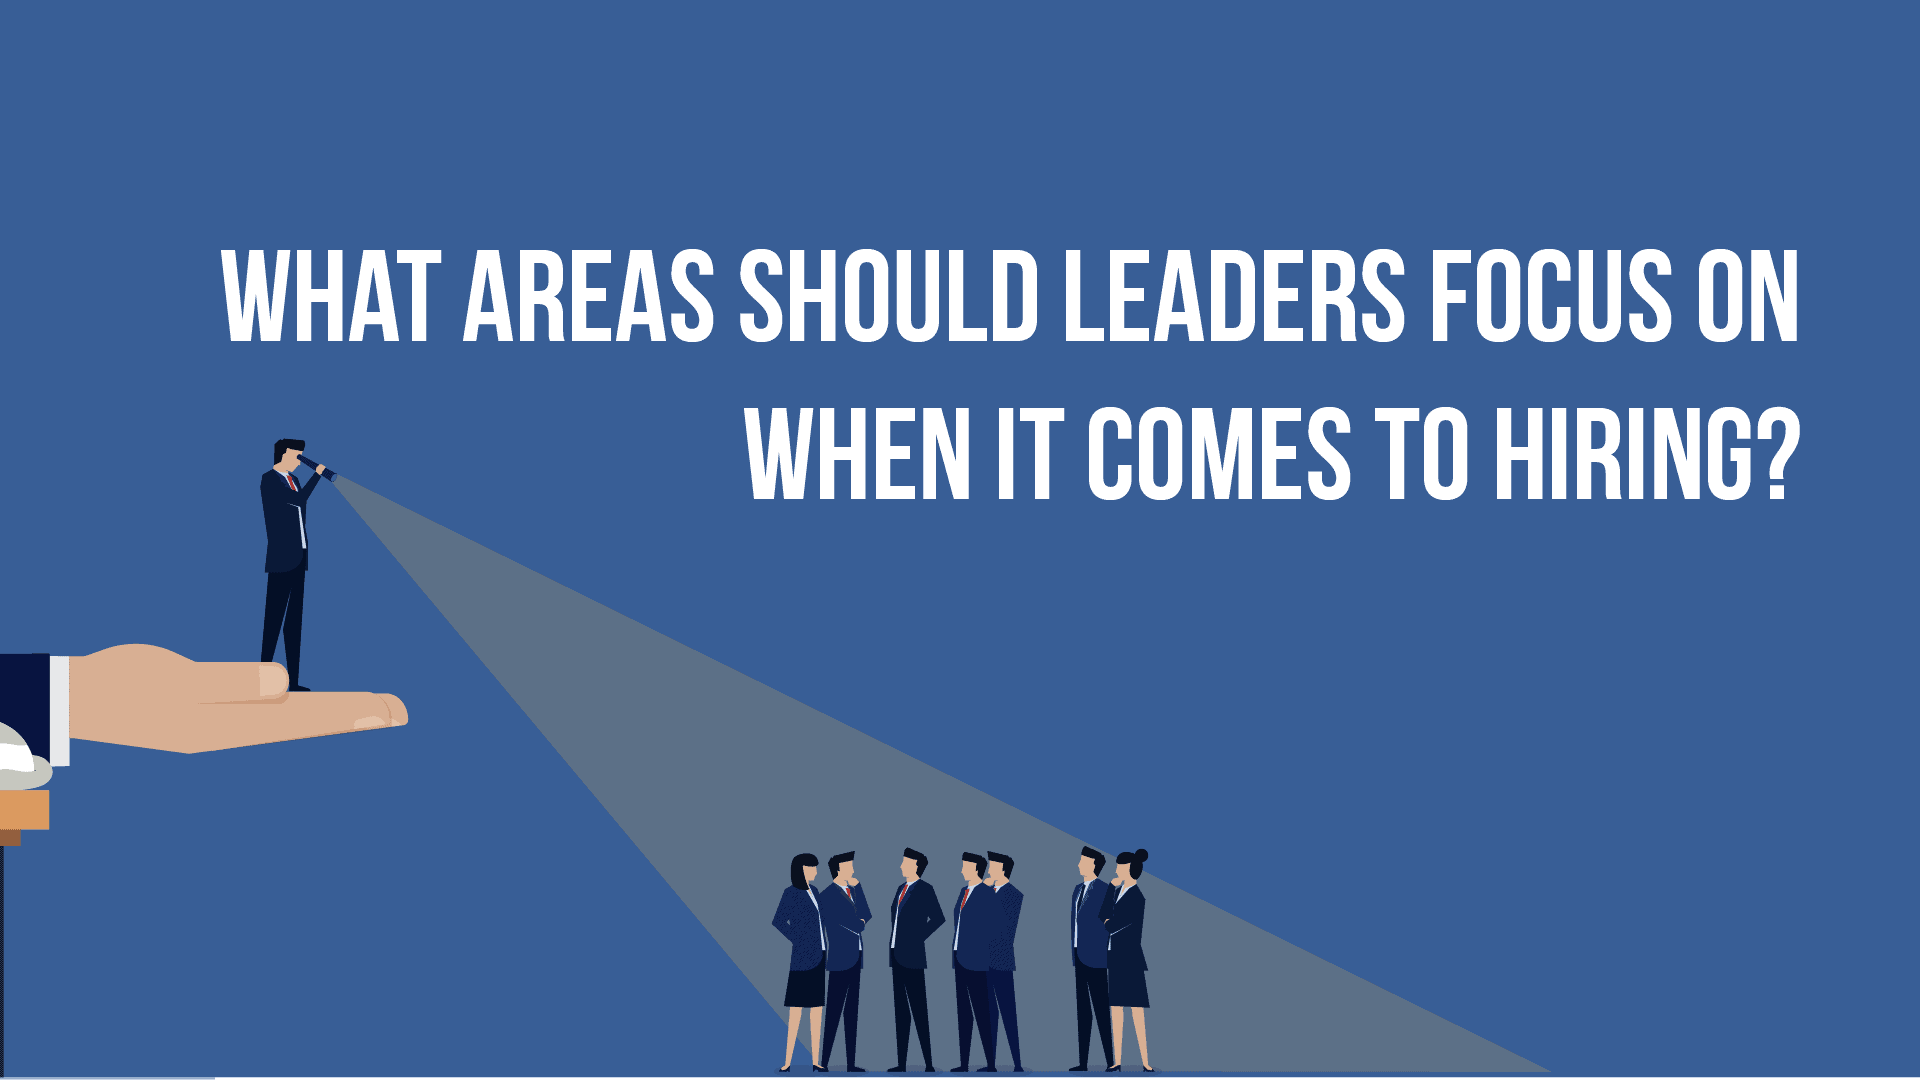 What Areas Should Leaders Focus on When it Comes to Hiring?